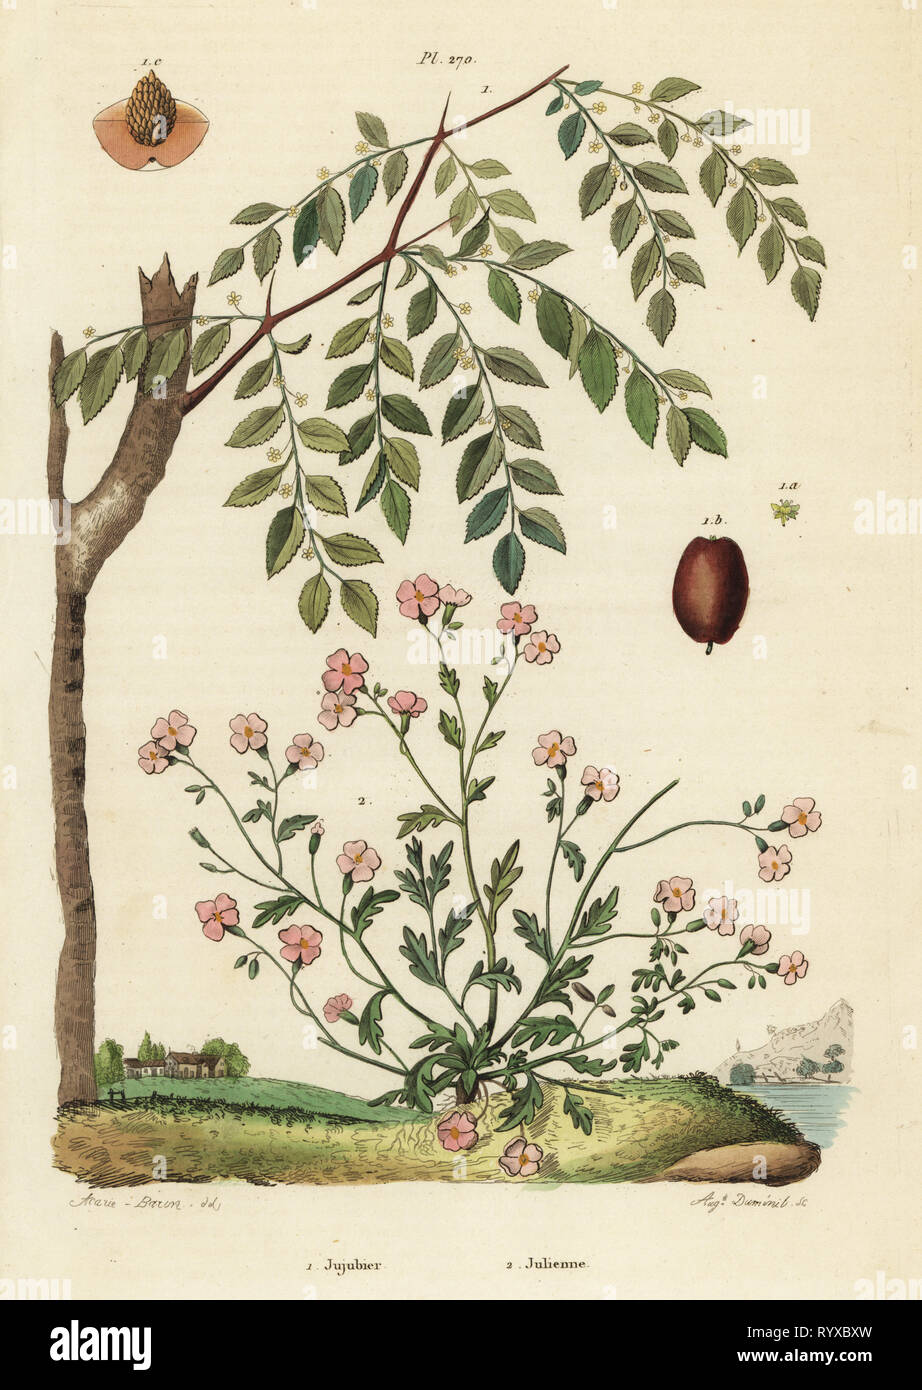 Jujube or Chinese date, Ziziphus jujuba 1, and Virginia stock, Malcolmia maritima 2. Jujubier, Julienne. Handcoloured steel engraving by August Dumenil after an illustration by A. Carie Baron from Felix-Edouard Guerin-Meneville's Dictionnaire Pittoresque d'Histoire Naturelle (Picturesque Dictionary of Natural History), Paris, 1834-39. Stock Photo